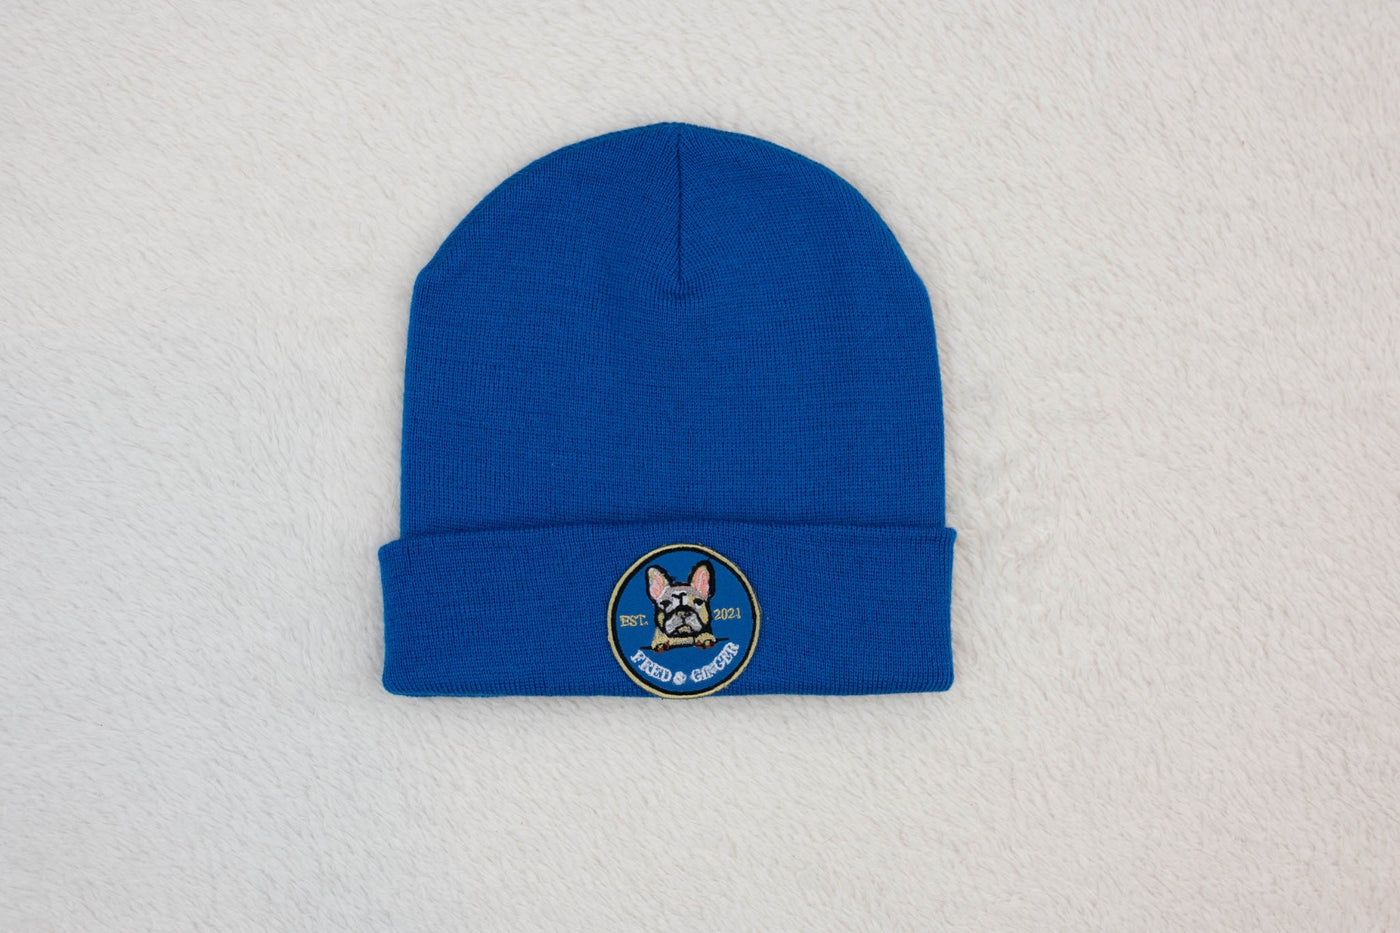 Beanie in Royal Blue - Fred & Ginger Official